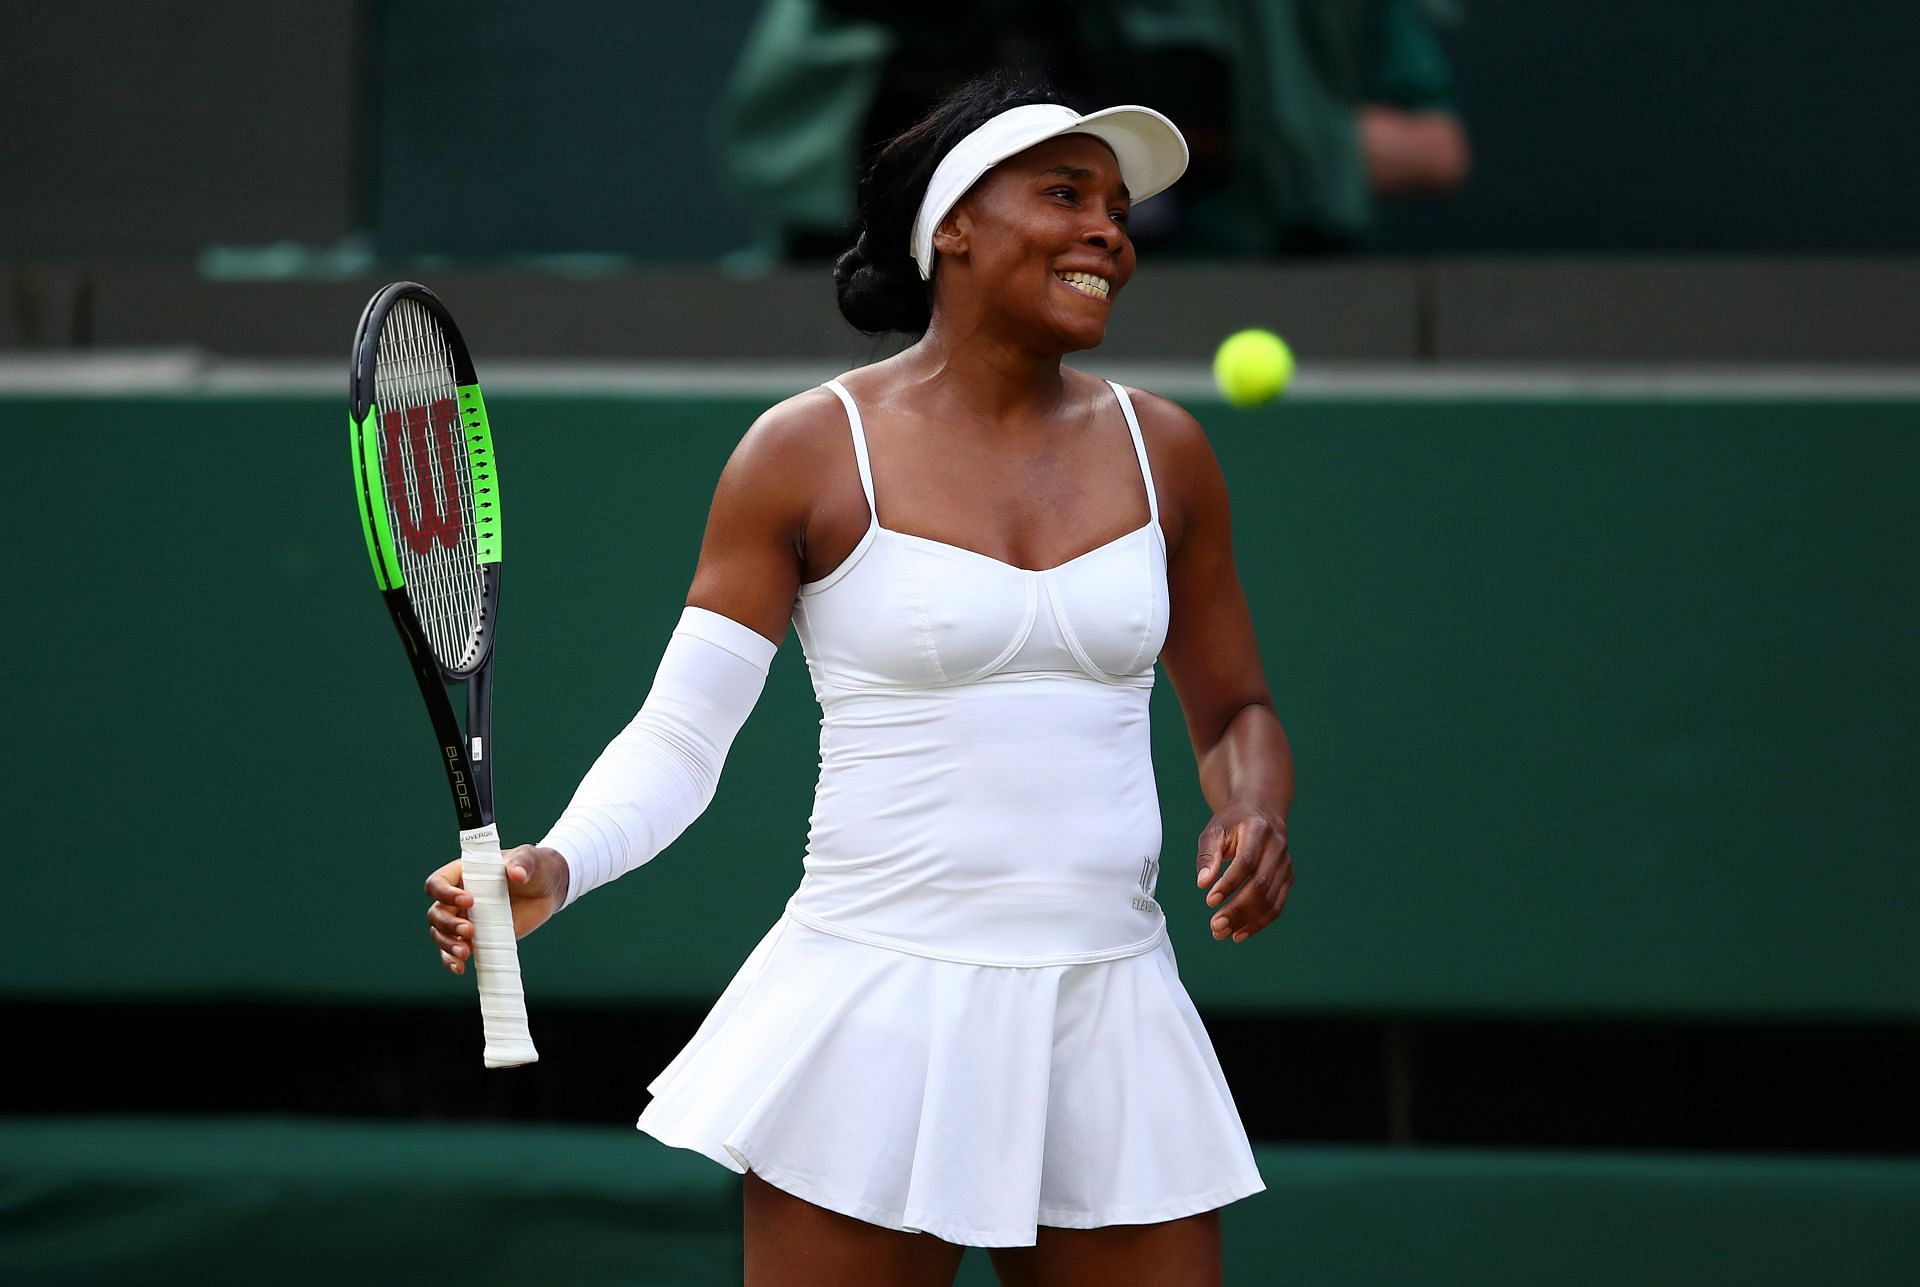 Venus Williams pictured at the Wimbledon Championships 2019.